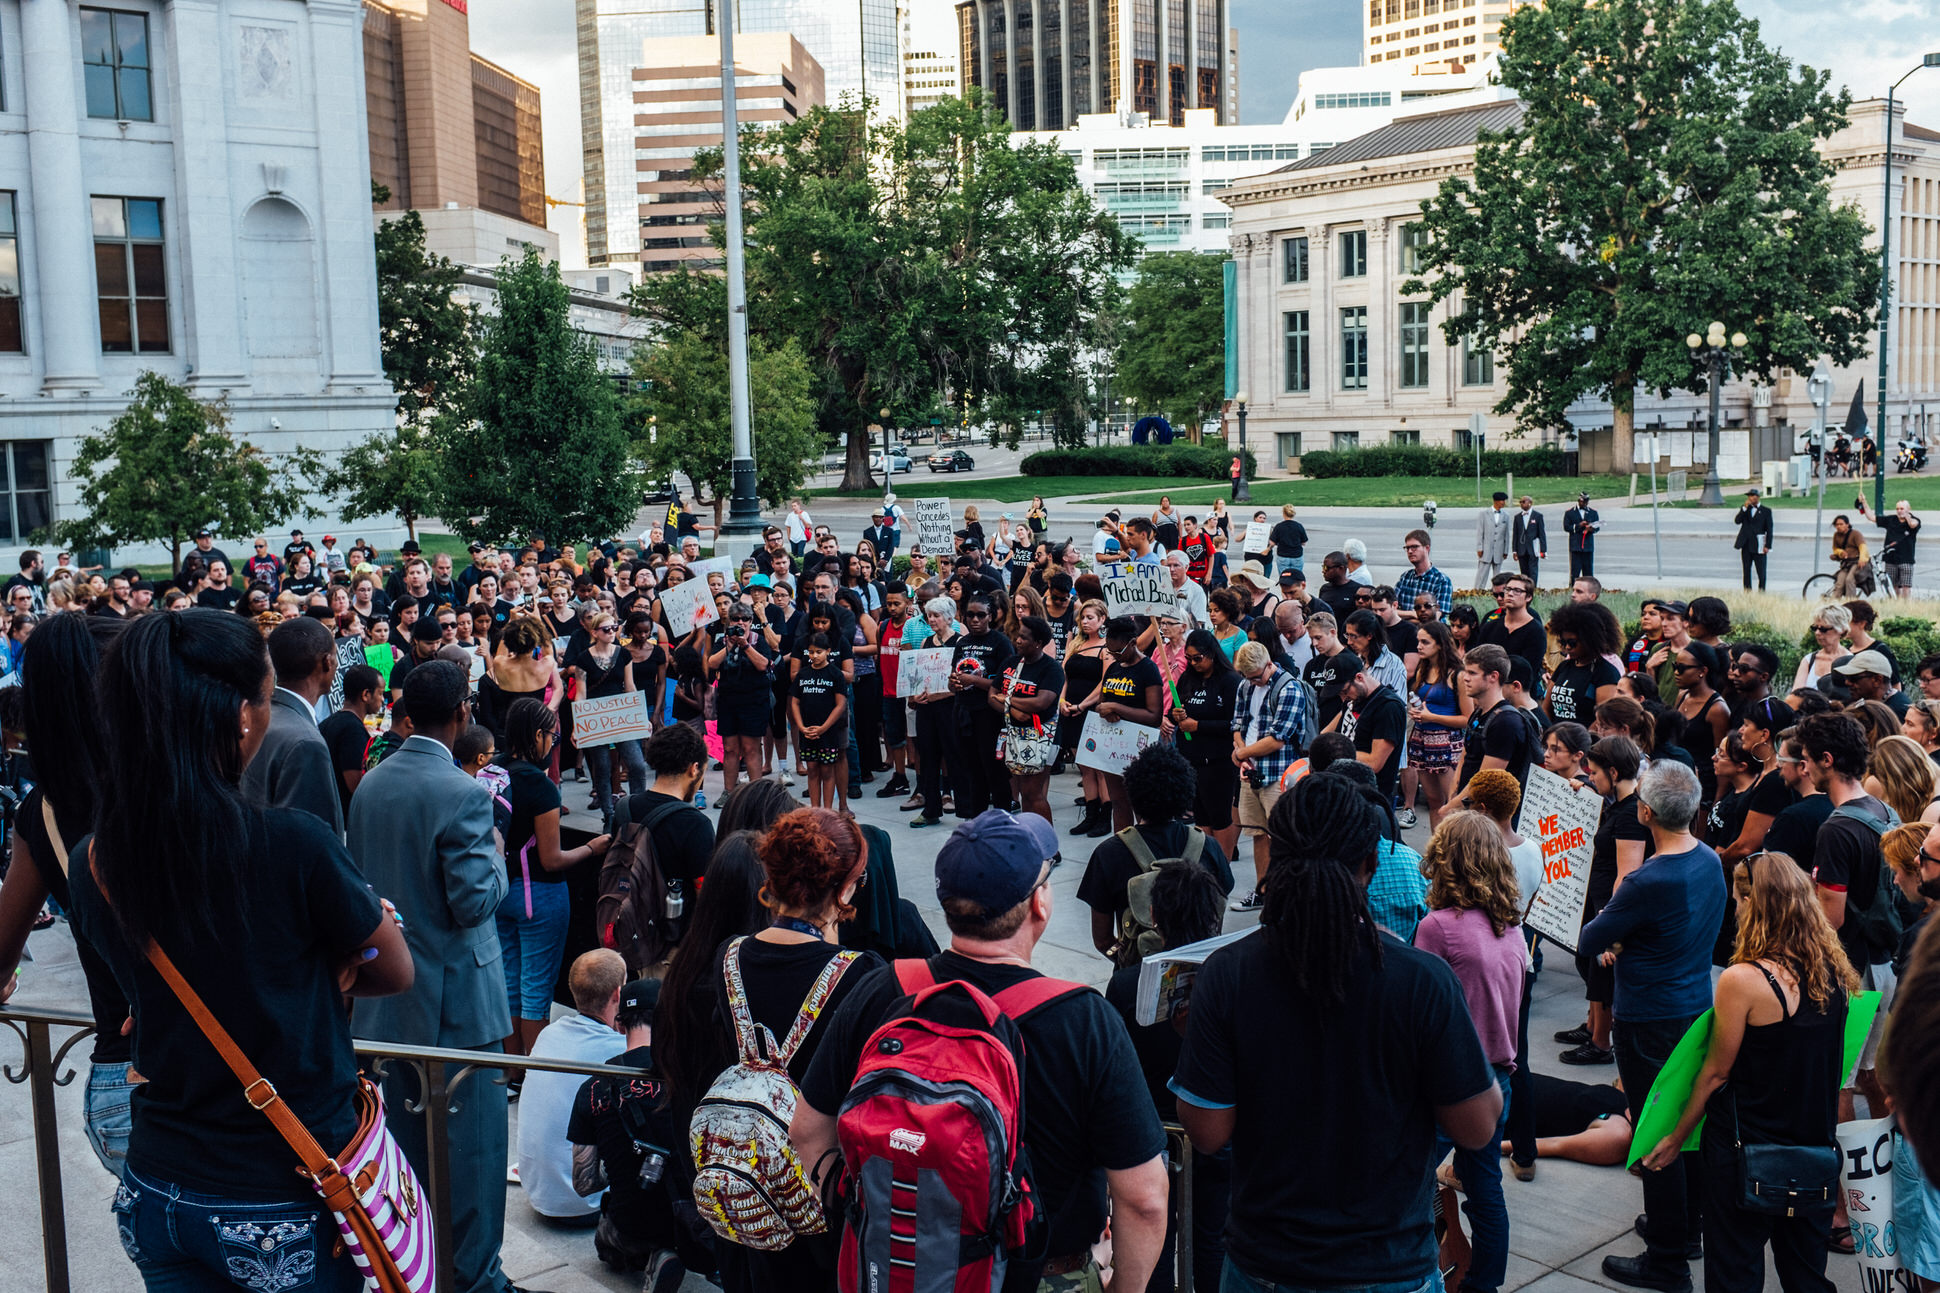 The BLM 5280 march reaches Denver's County Courthouse and holds a vigil for victims of police violence.